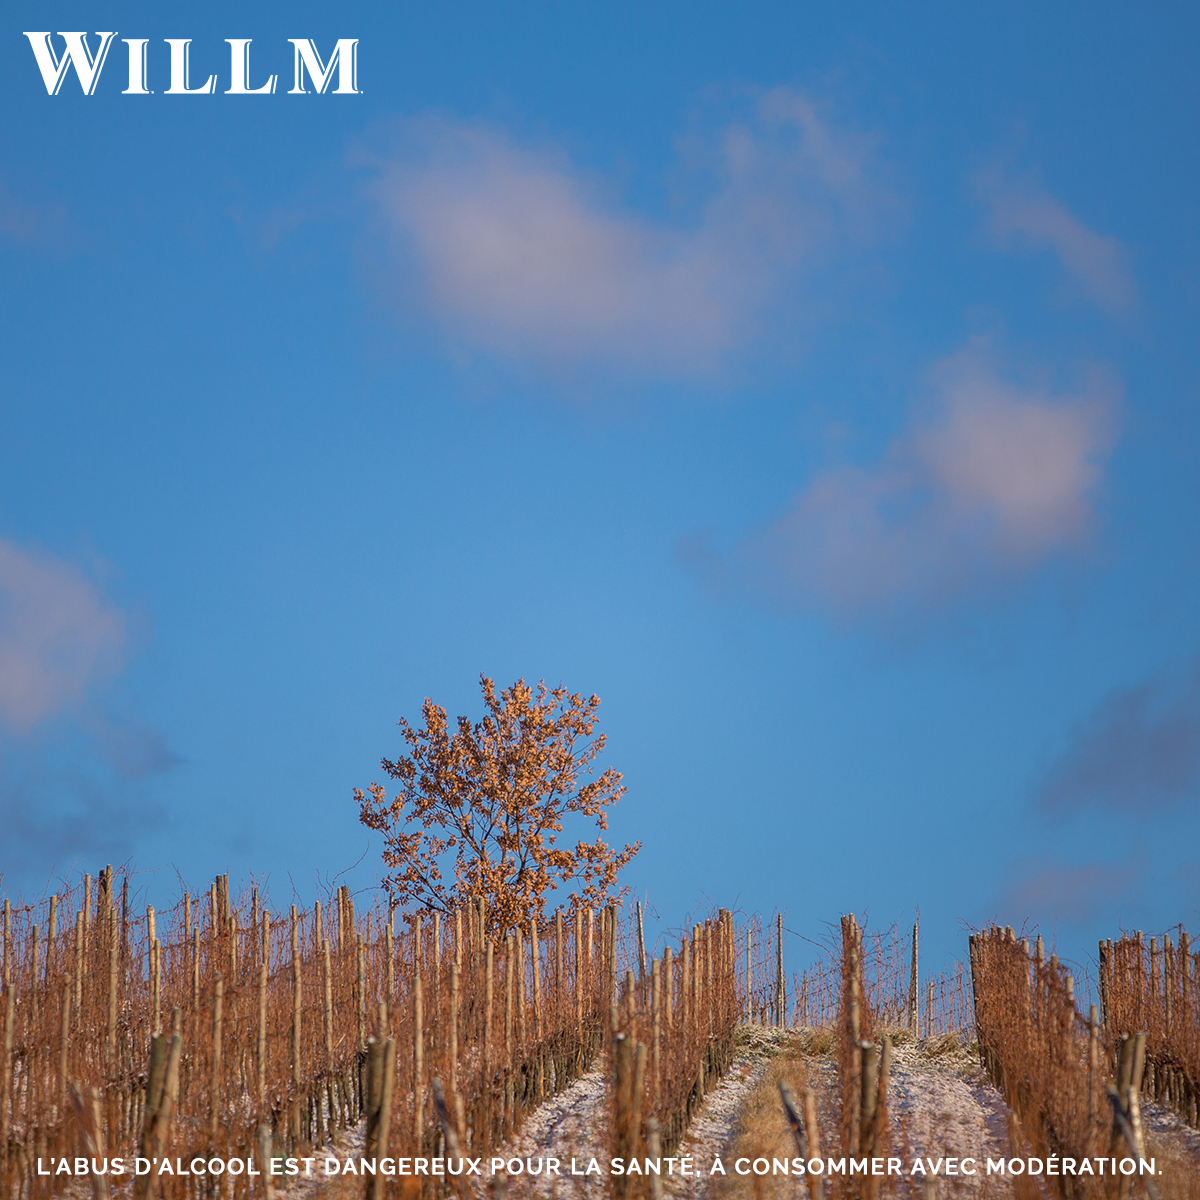 The cold has taken hold in #Alsace! Our #winegrowers are currently pruning the vines, a decisive step for the future vintage! #drinkalsace #alsacerocks #willm #alsacewillm #vineyard #wine #alsacewine